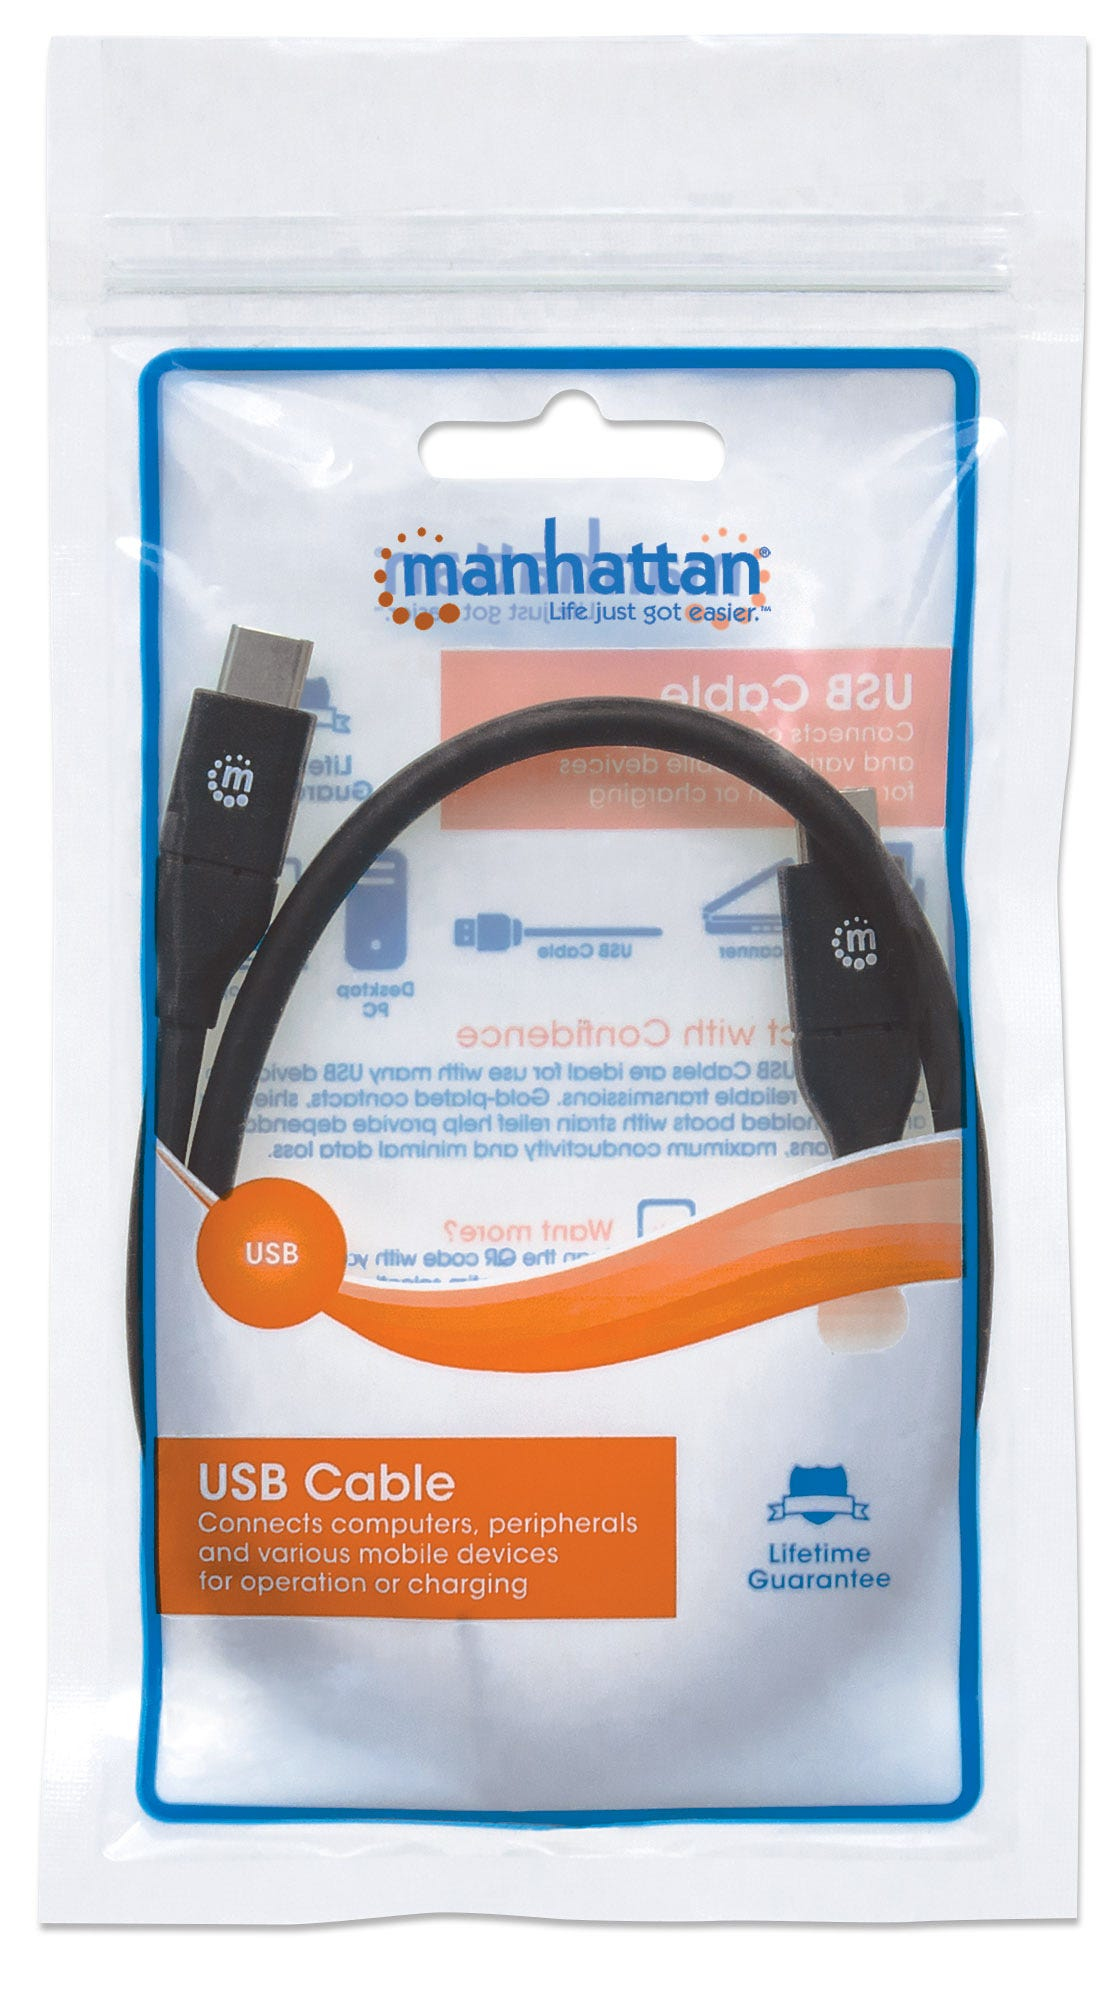 Manhattan USB-C to USB-C Cable, 50cm, Male to Male, 10 Gbps (USB 3.2 Gen2 aka USB 3.1), 3A (fast charging), Black, Lifetime Warranty, Polybag